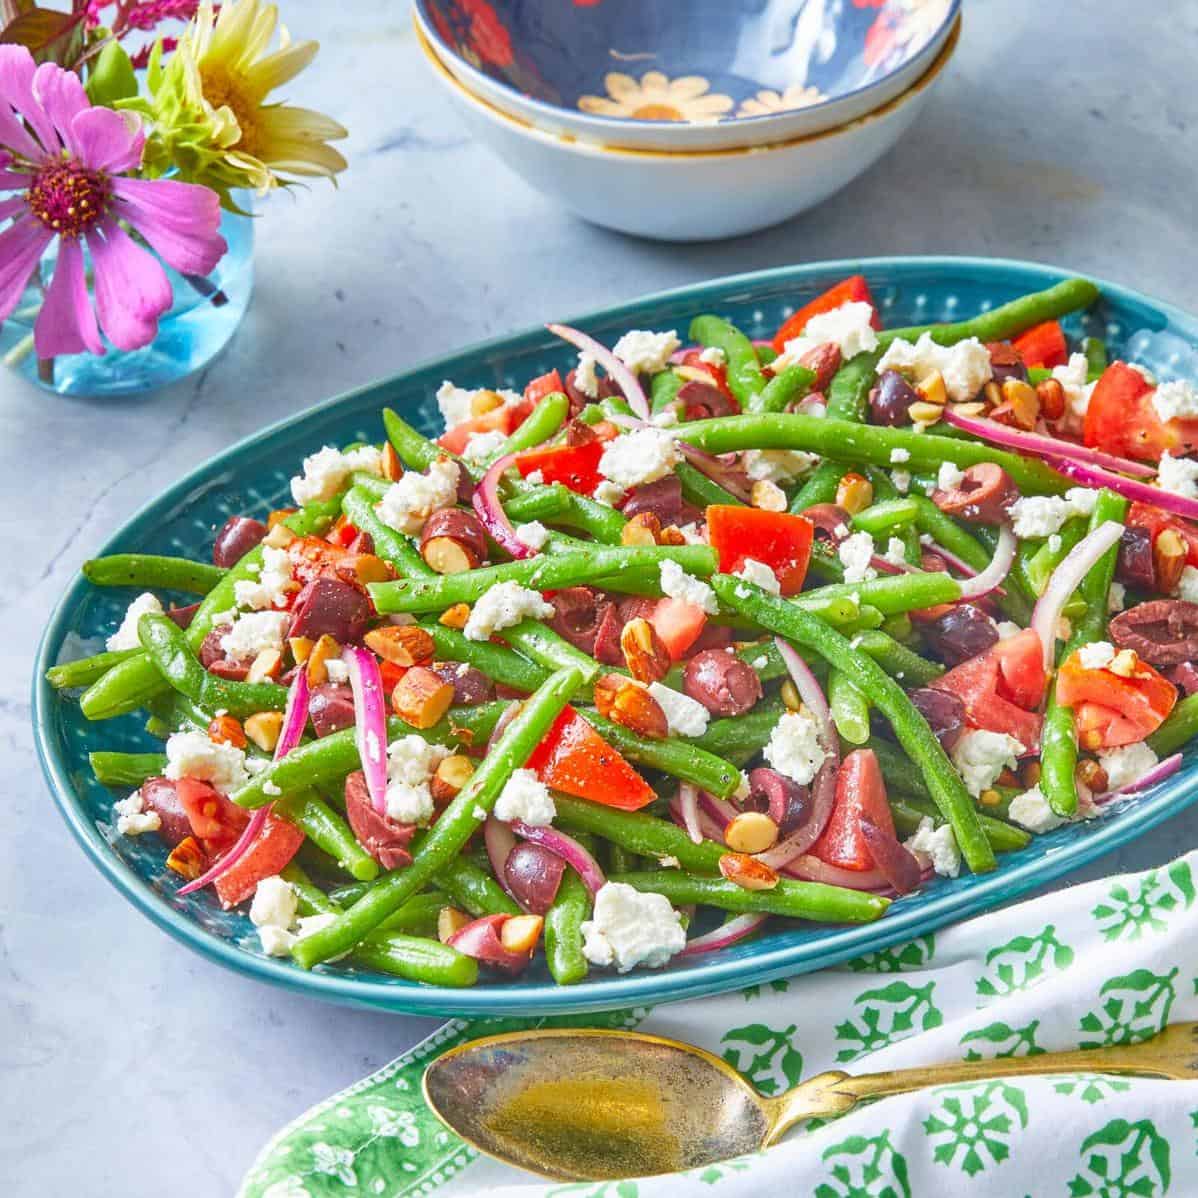  Easy to make and impressive to serve, this salad is a crowd-pleaser.